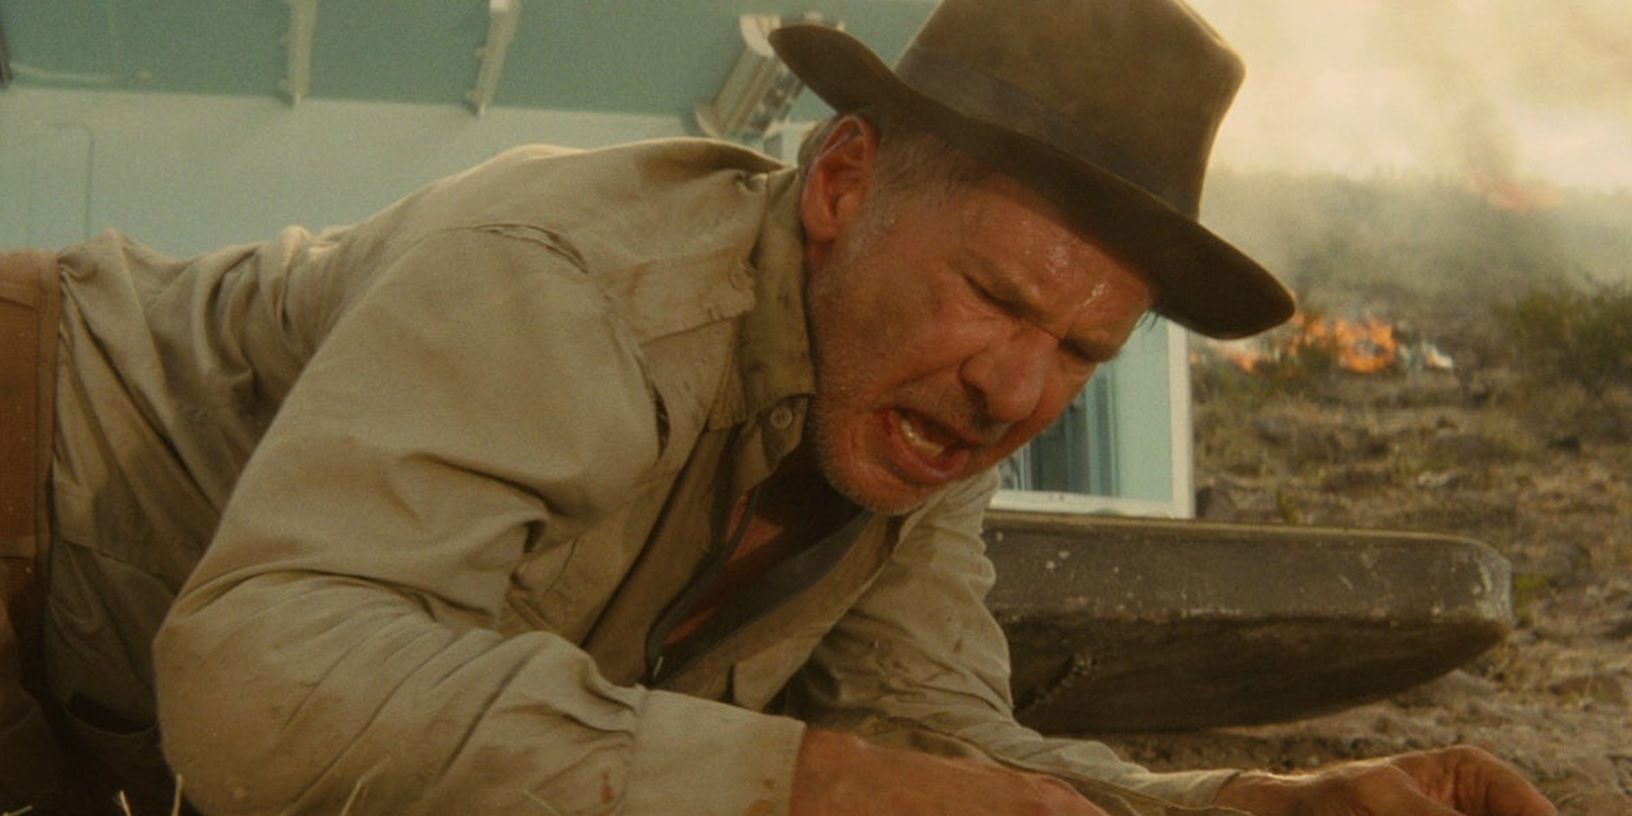 Indy emerges from a fridge in Indiana Jones and the Kingdom of the Crystal Skull